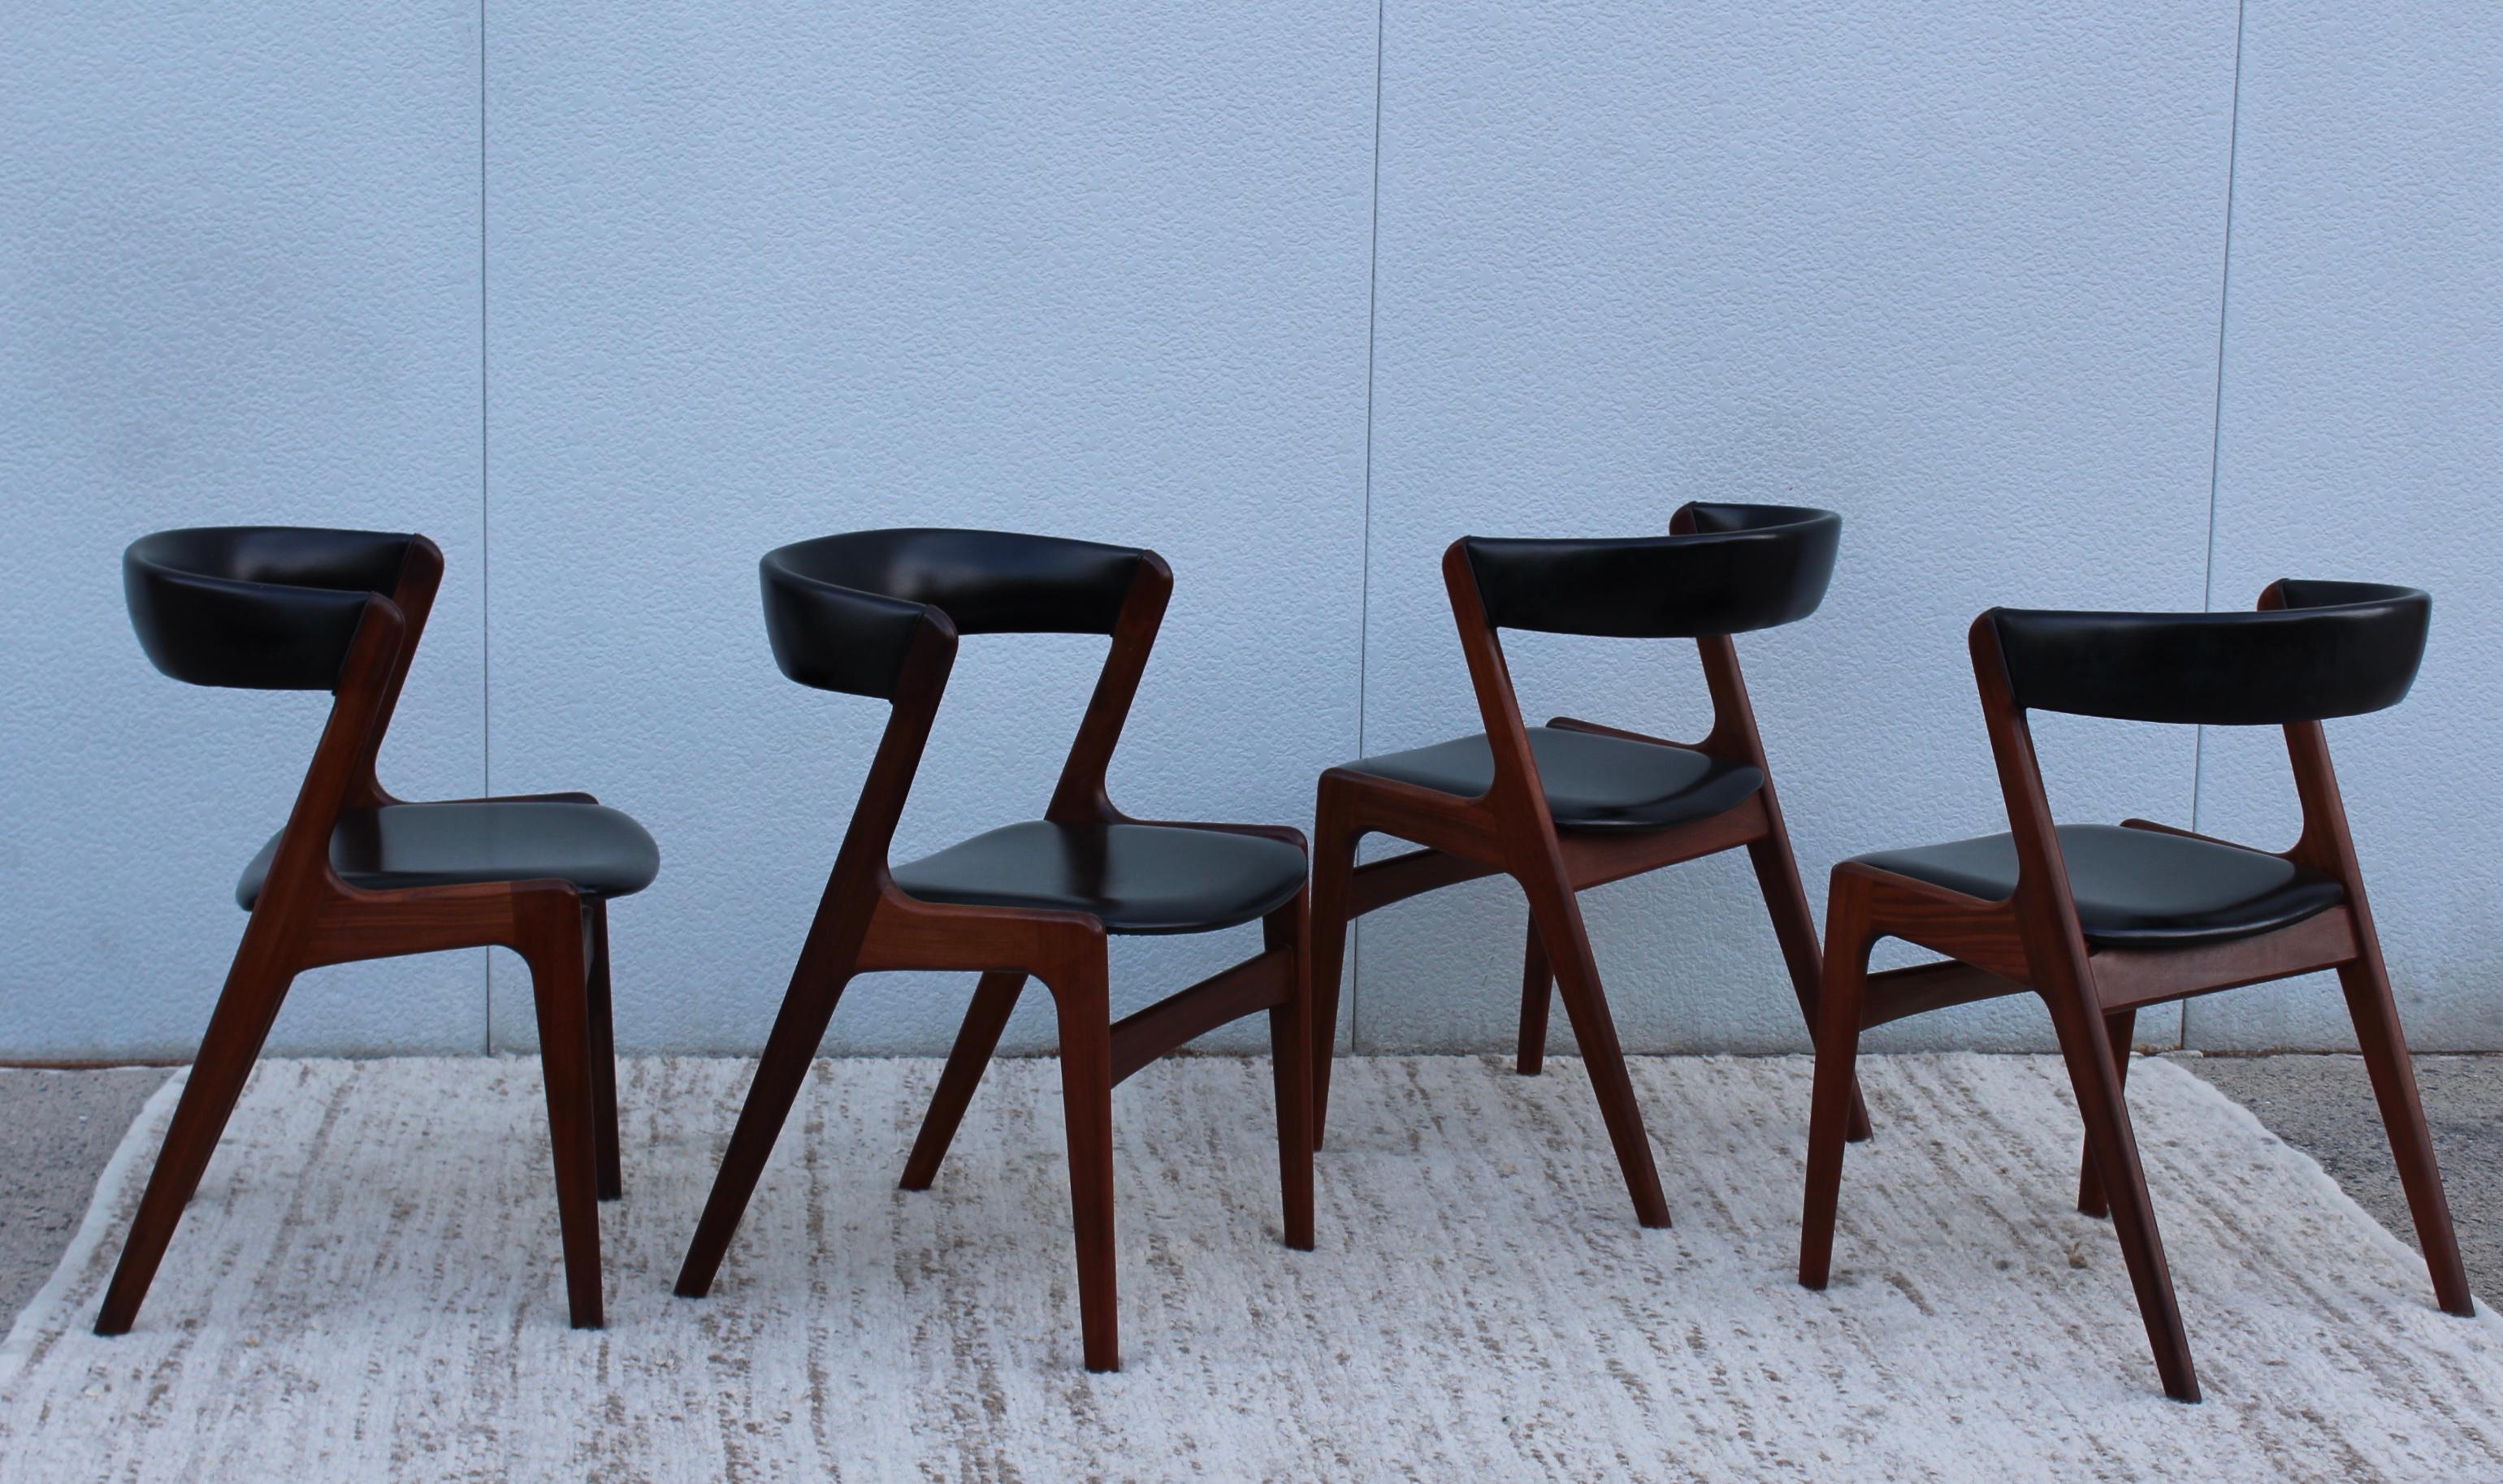 Stunning set of 4 1960s teak and naugahyde dining chairs. In vintage original condition.

Dining table for photography only. But is available for purchase.